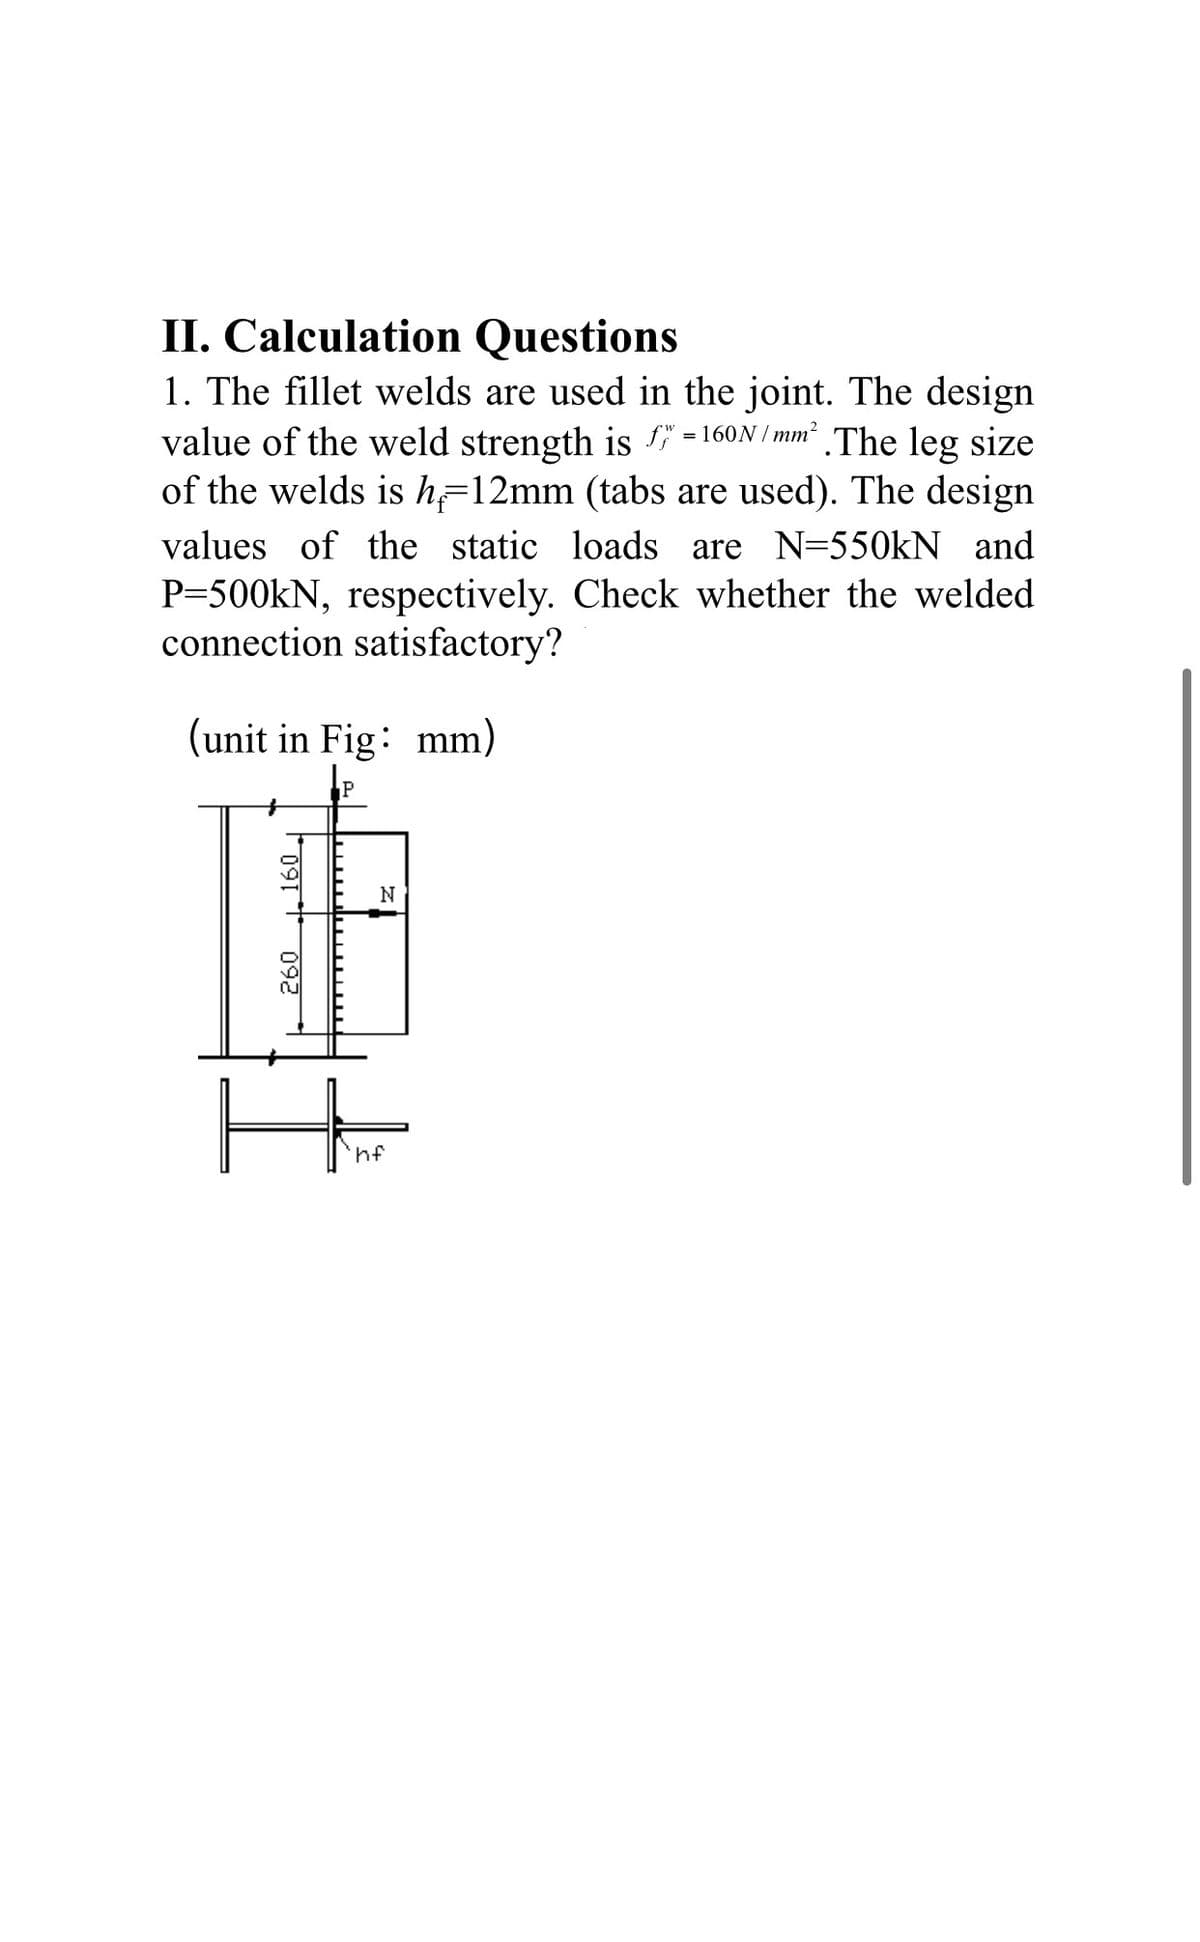 II. Calculation Questions
1. The fillet welds are used in the joint. The design
value of the weld strength is f" = 160N / mm² .The leg size
of the welds is h=12mm (tabs are used). The design
values of the static loads are N=550kN and
P=500kN, respectively. Check whether the welded
connection satisfactory?
(unit in Fig: mm)
F091 ** 092
